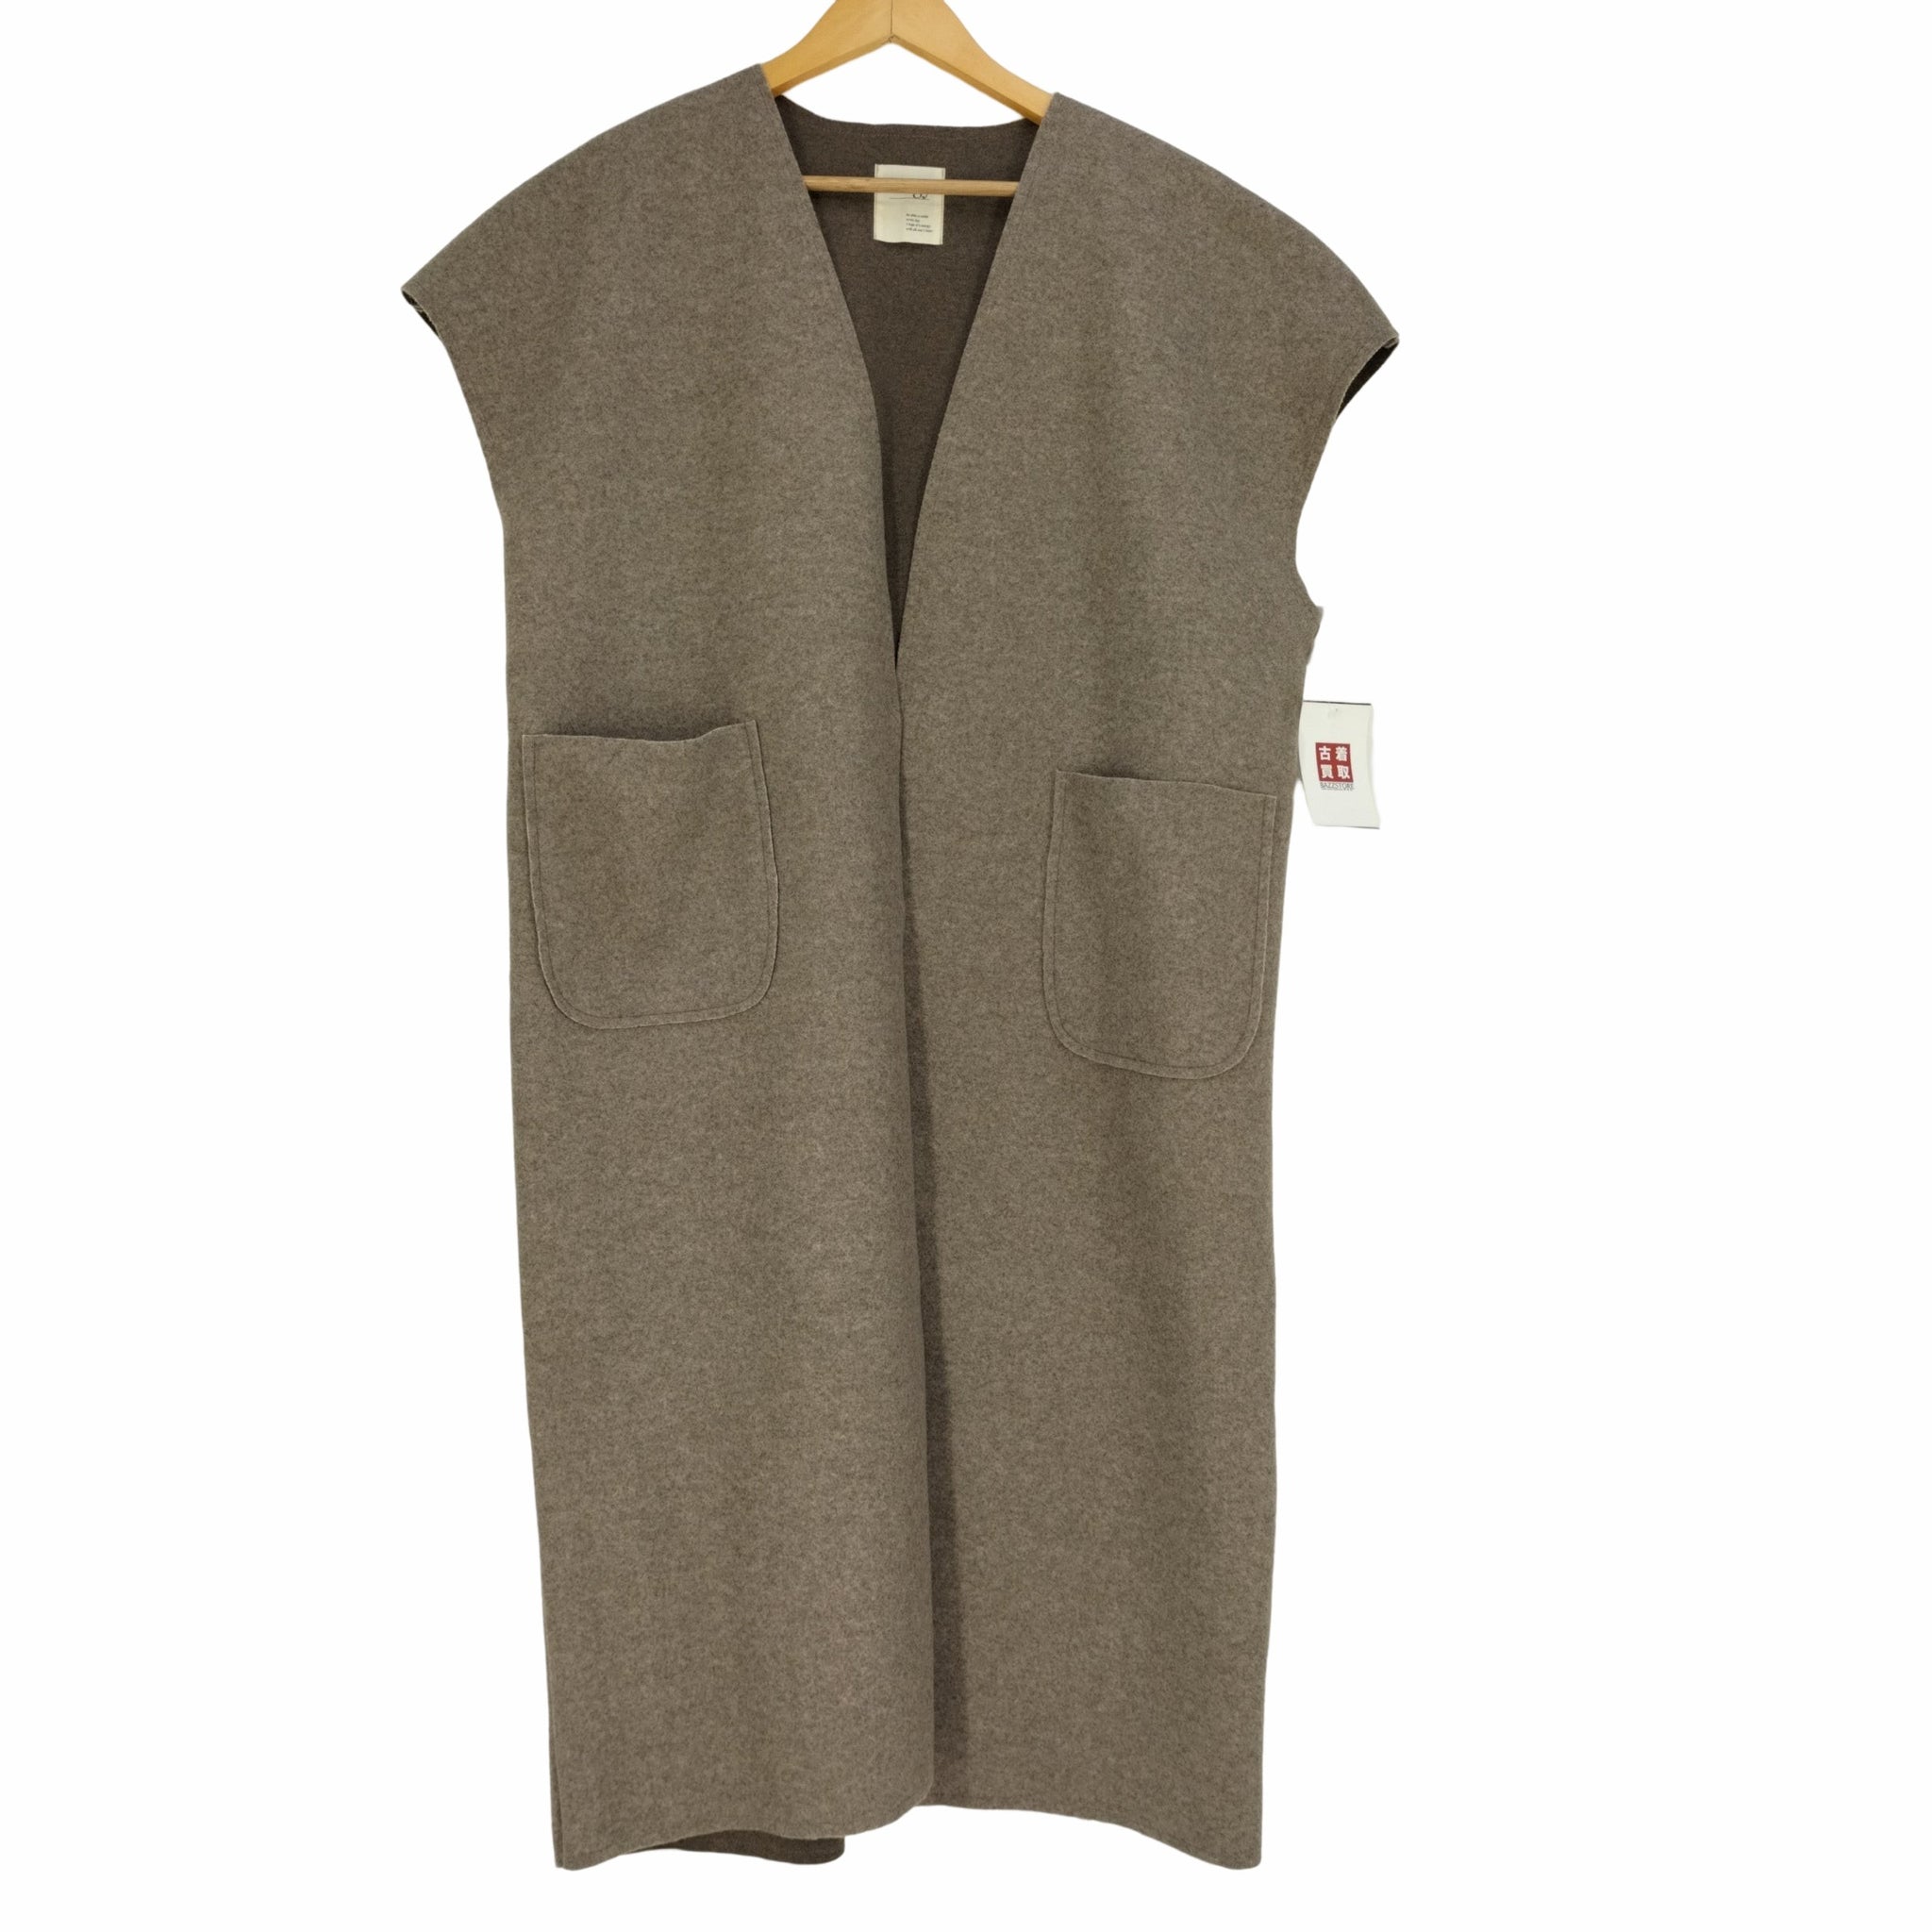 lawgy two pocket gown vest - ベスト